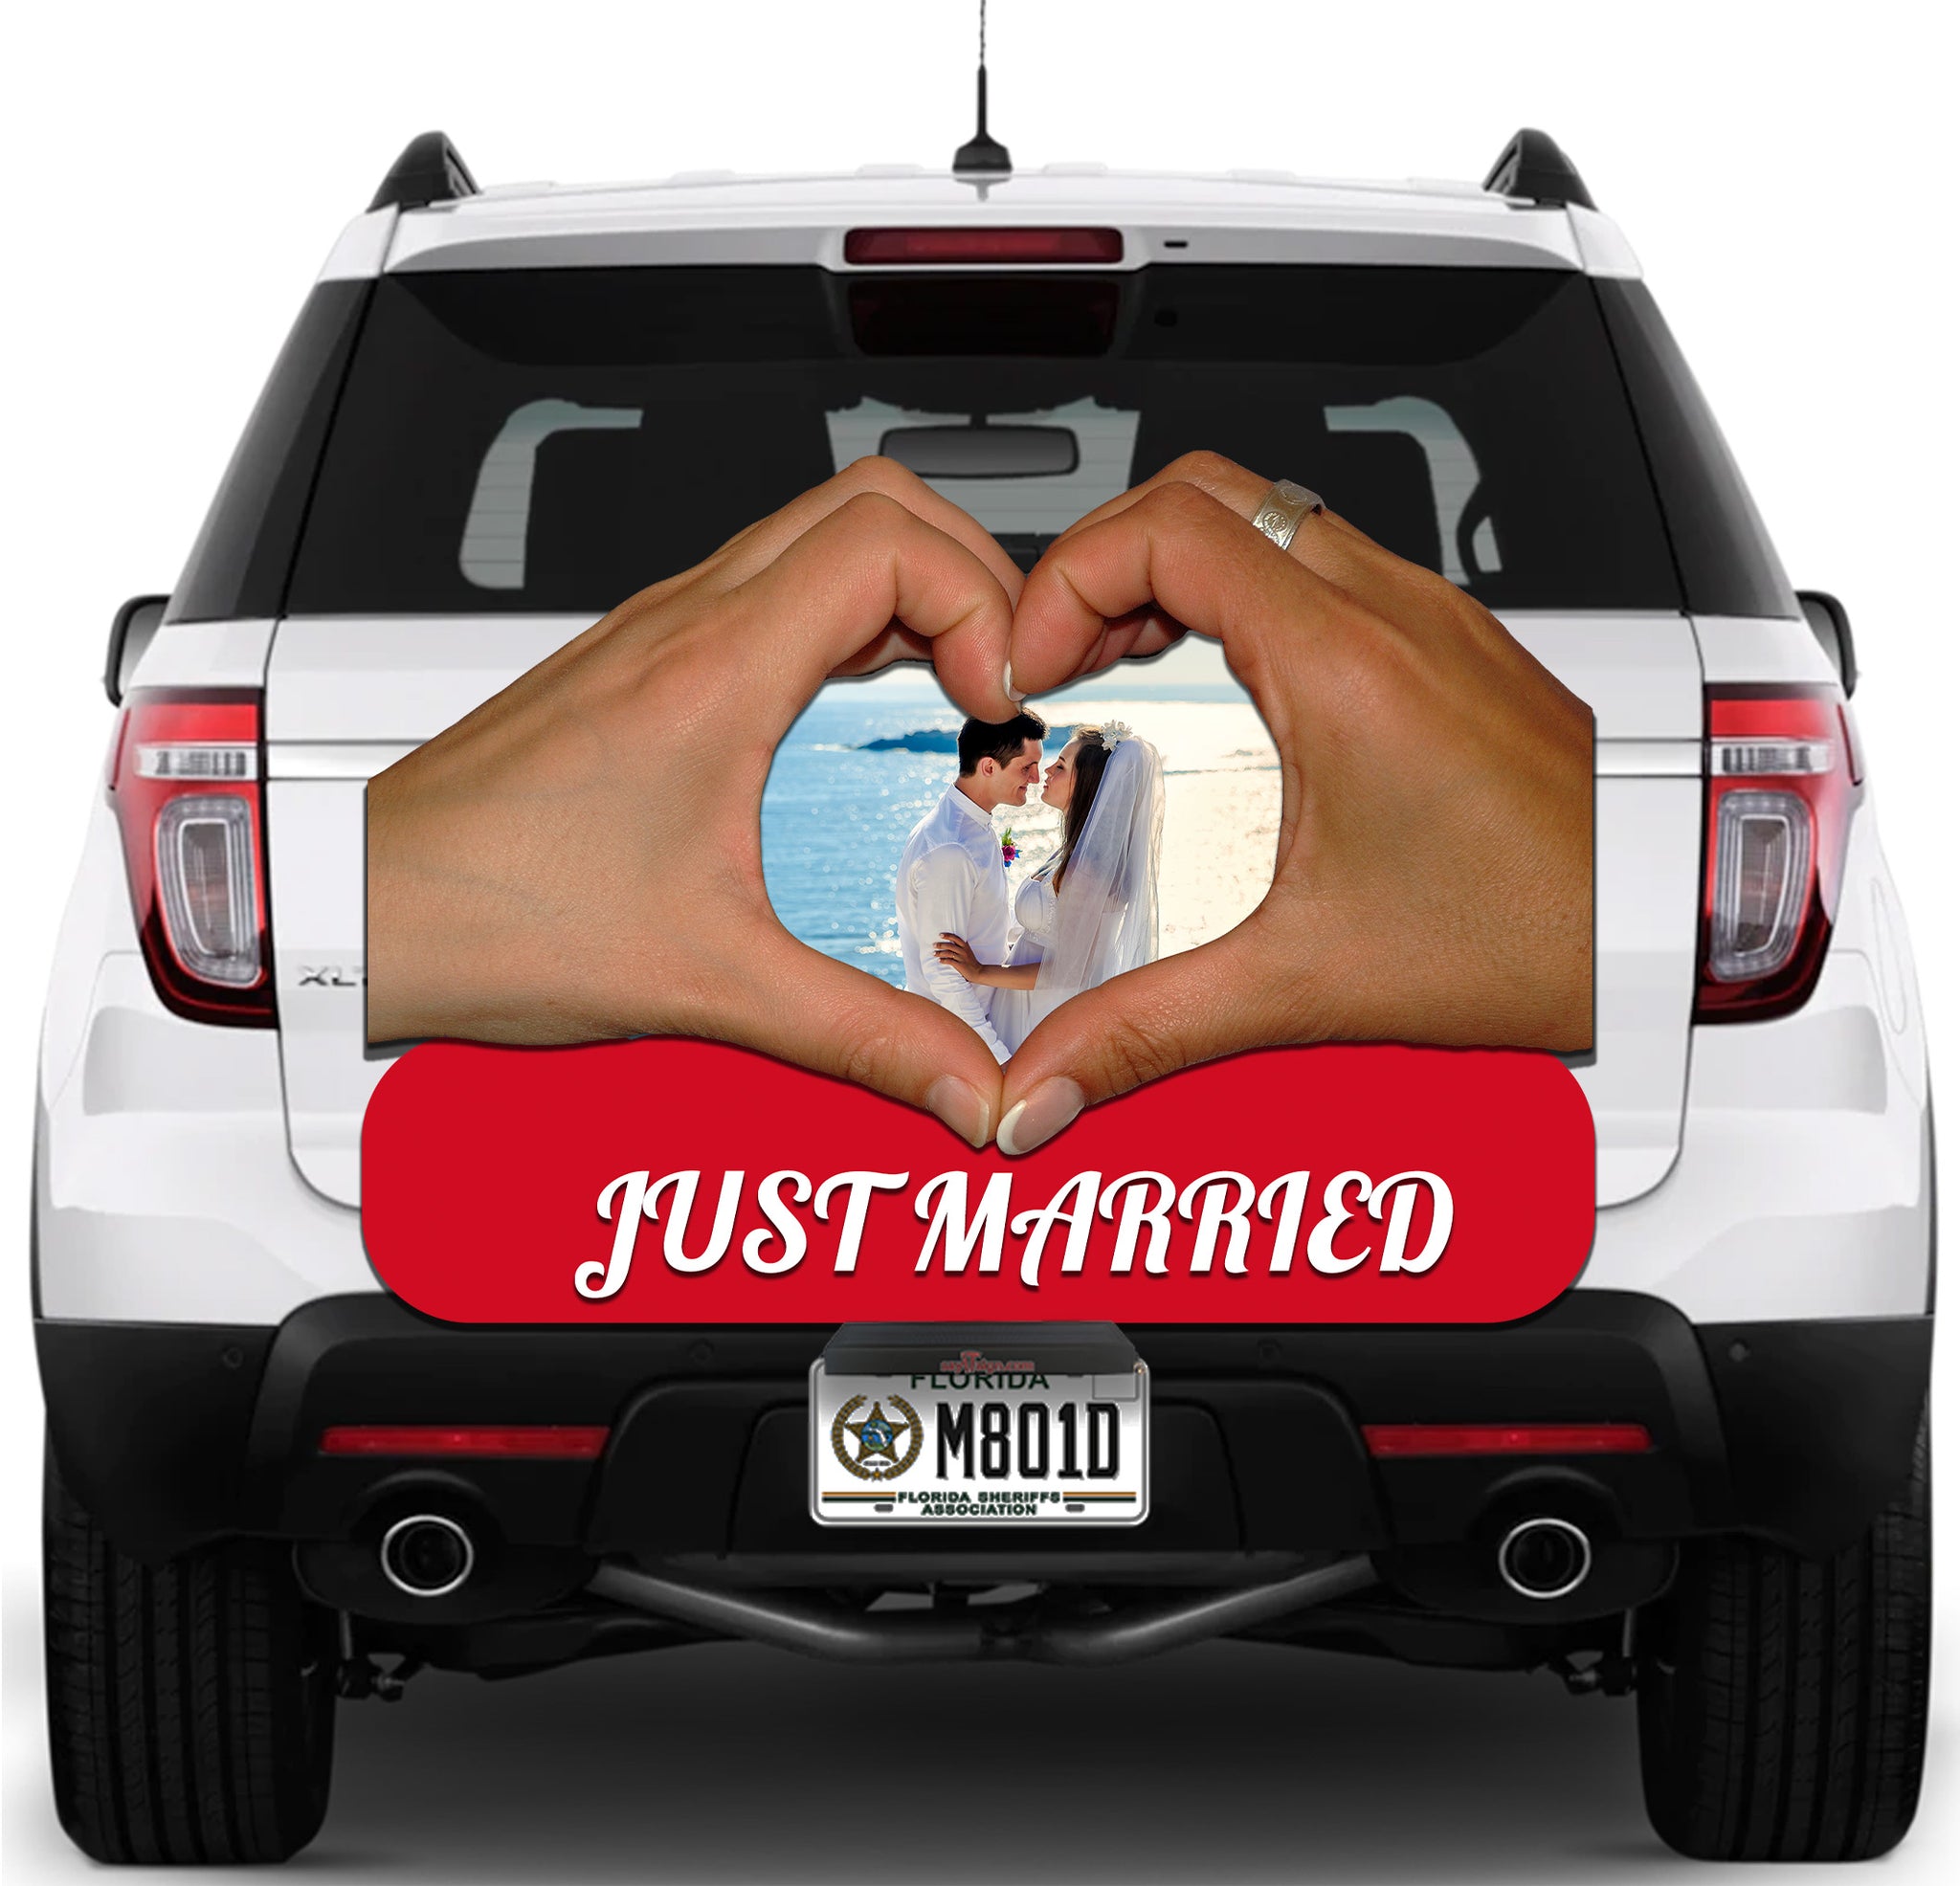 Image of Heart Hands Just Married